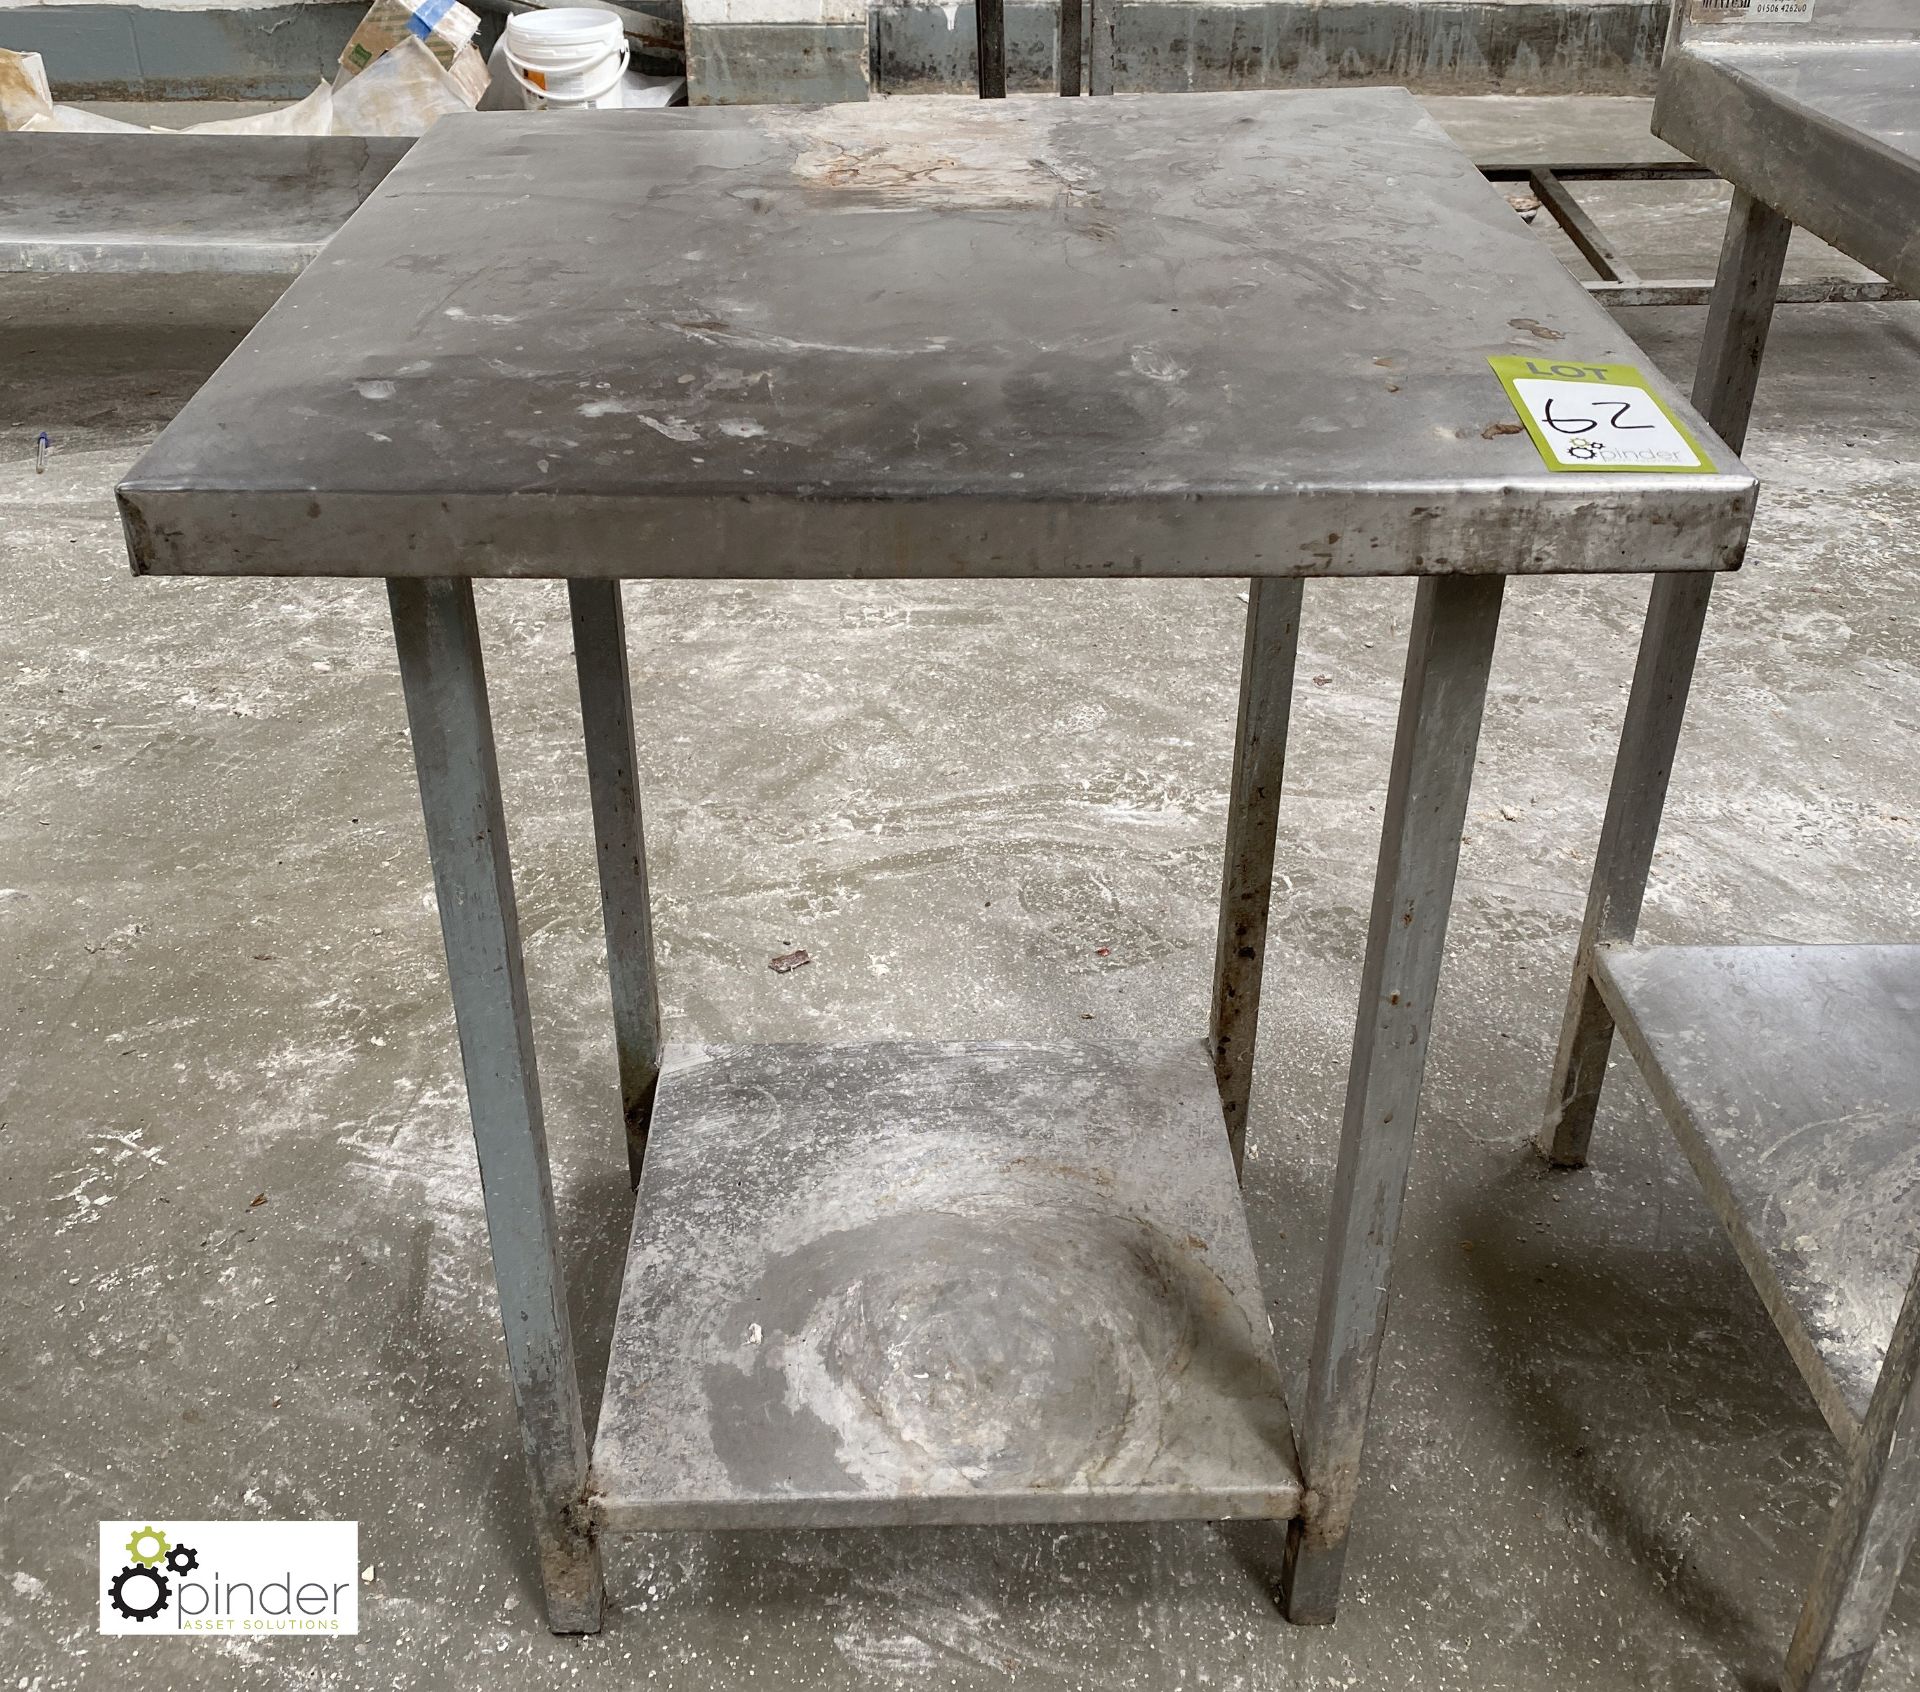 Stainless steel Preparation Table, 610mm x 610mm x 820mm, with rear lip and undershelf (located in